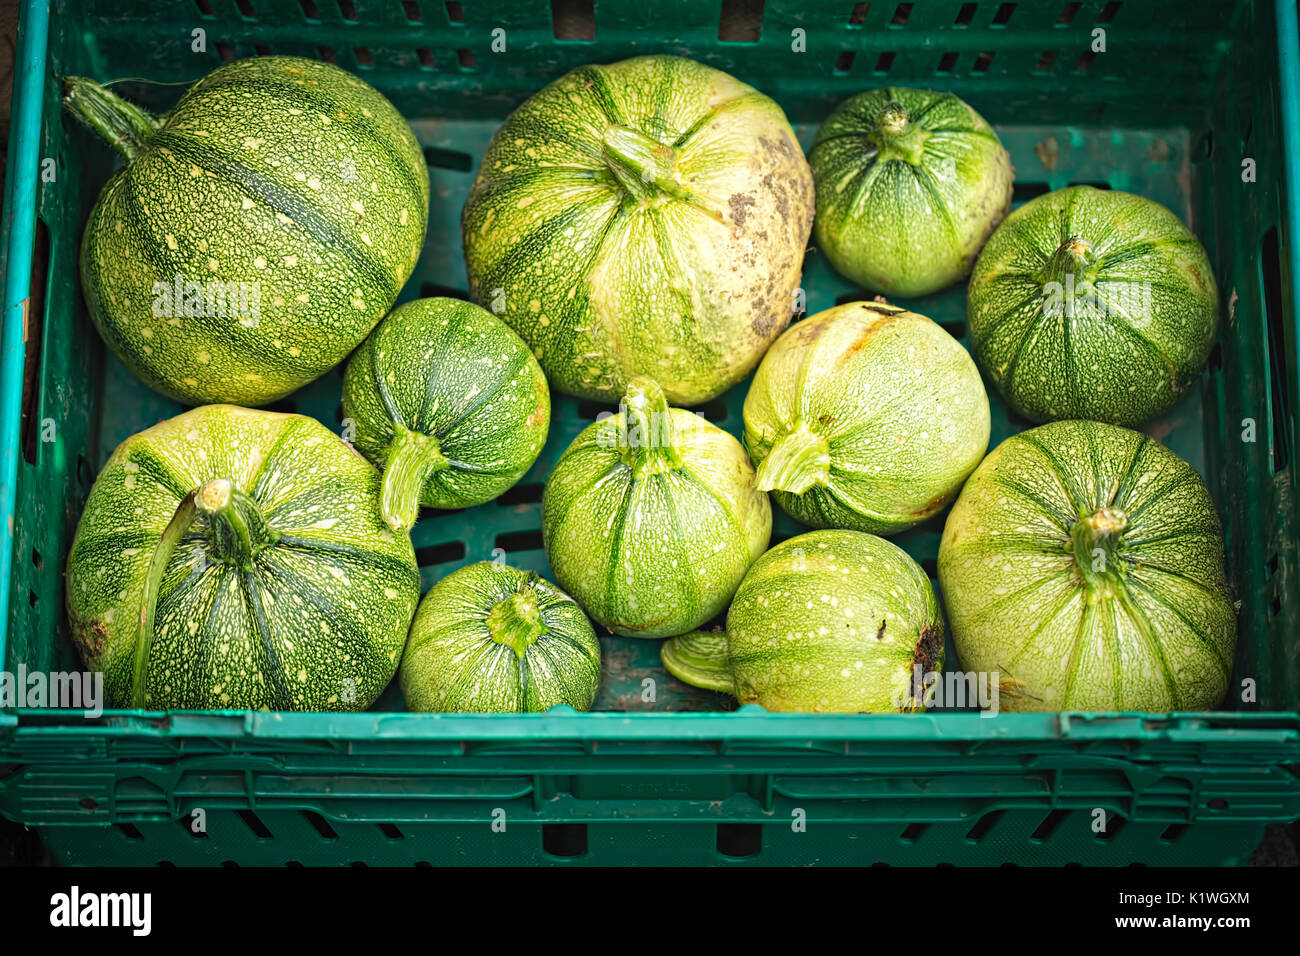 Young acorn green squash in green container on food market Stock Photo